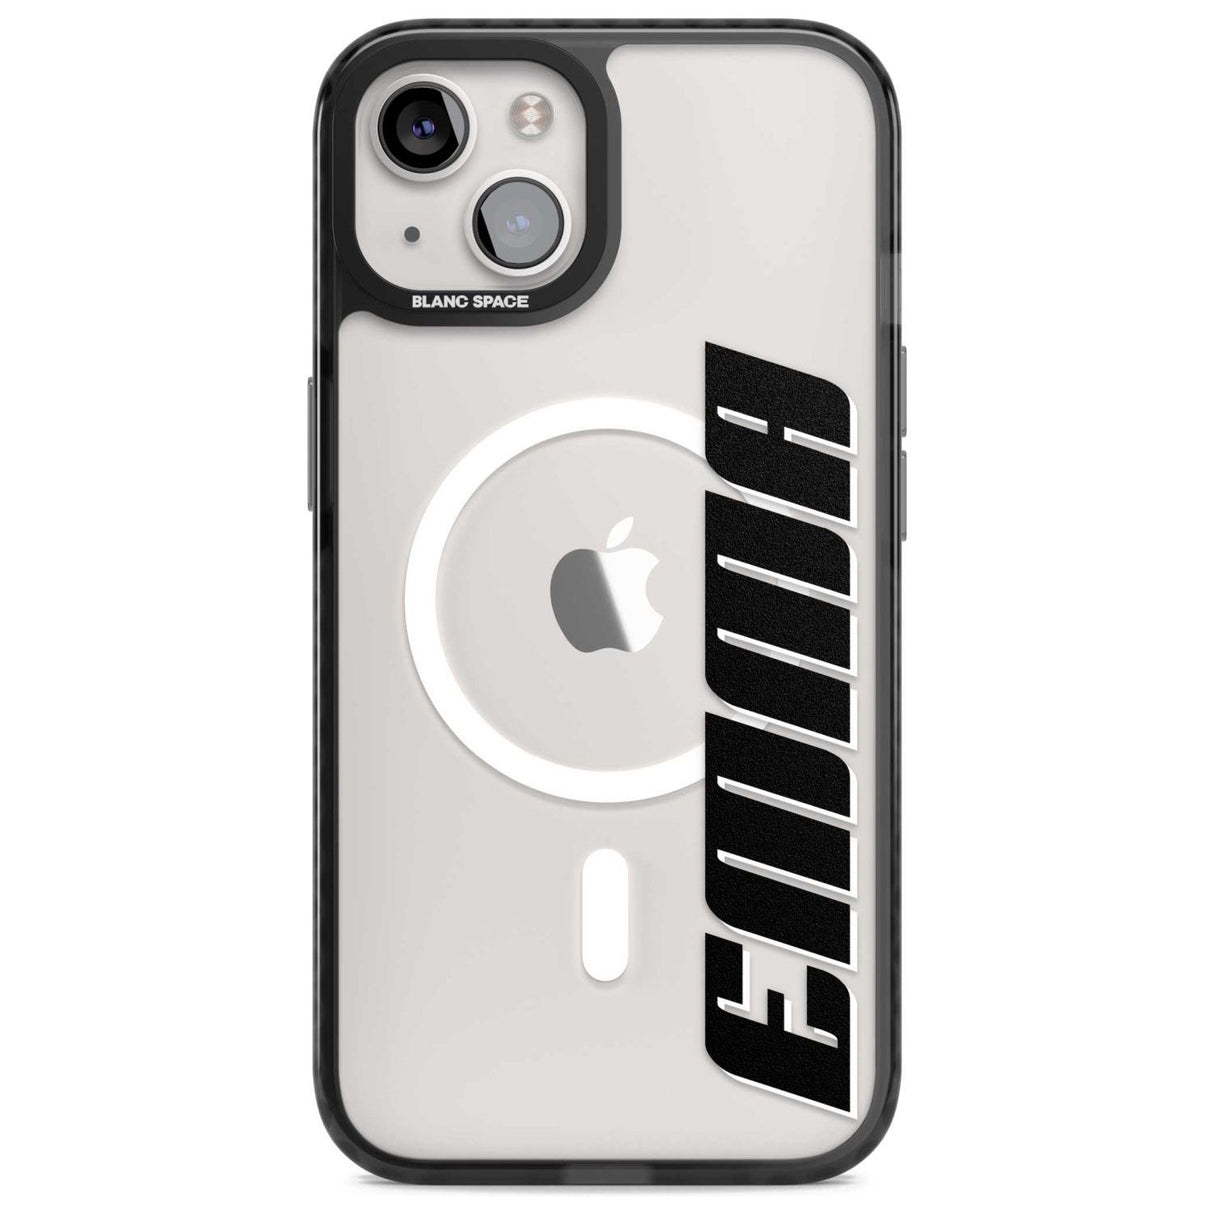 Personalised Clear Text  4A Custom Phone Case iPhone 15 Plus / Magsafe Black Impact Case,iPhone 15 / Magsafe Black Impact Case,iPhone 14 Plus / Magsafe Black Impact Case,iPhone 14 / Magsafe Black Impact Case,iPhone 13 / Magsafe Black Impact Case Blanc Space